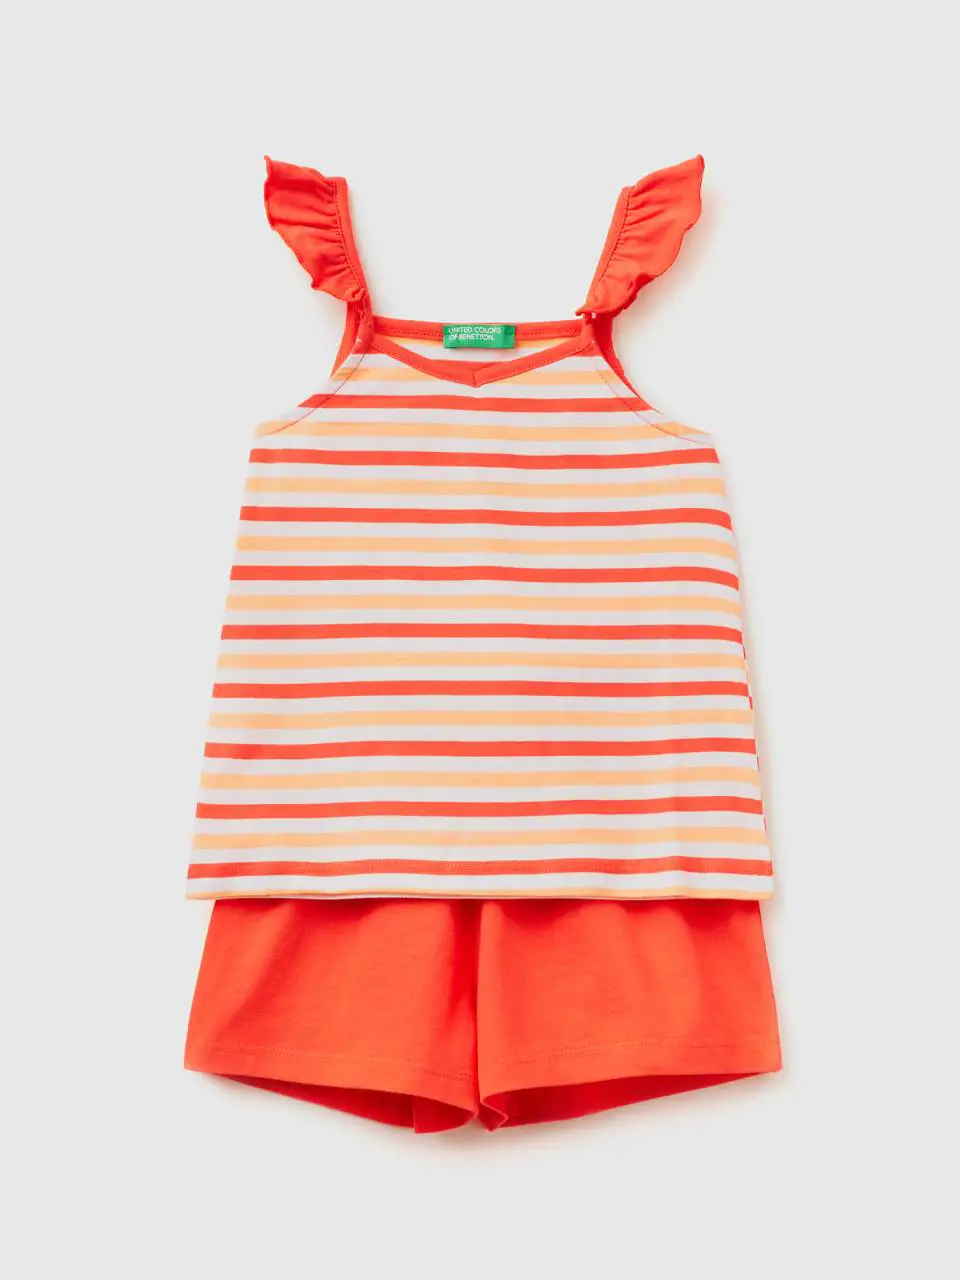 Benetton striped tank top and shorts set. 1